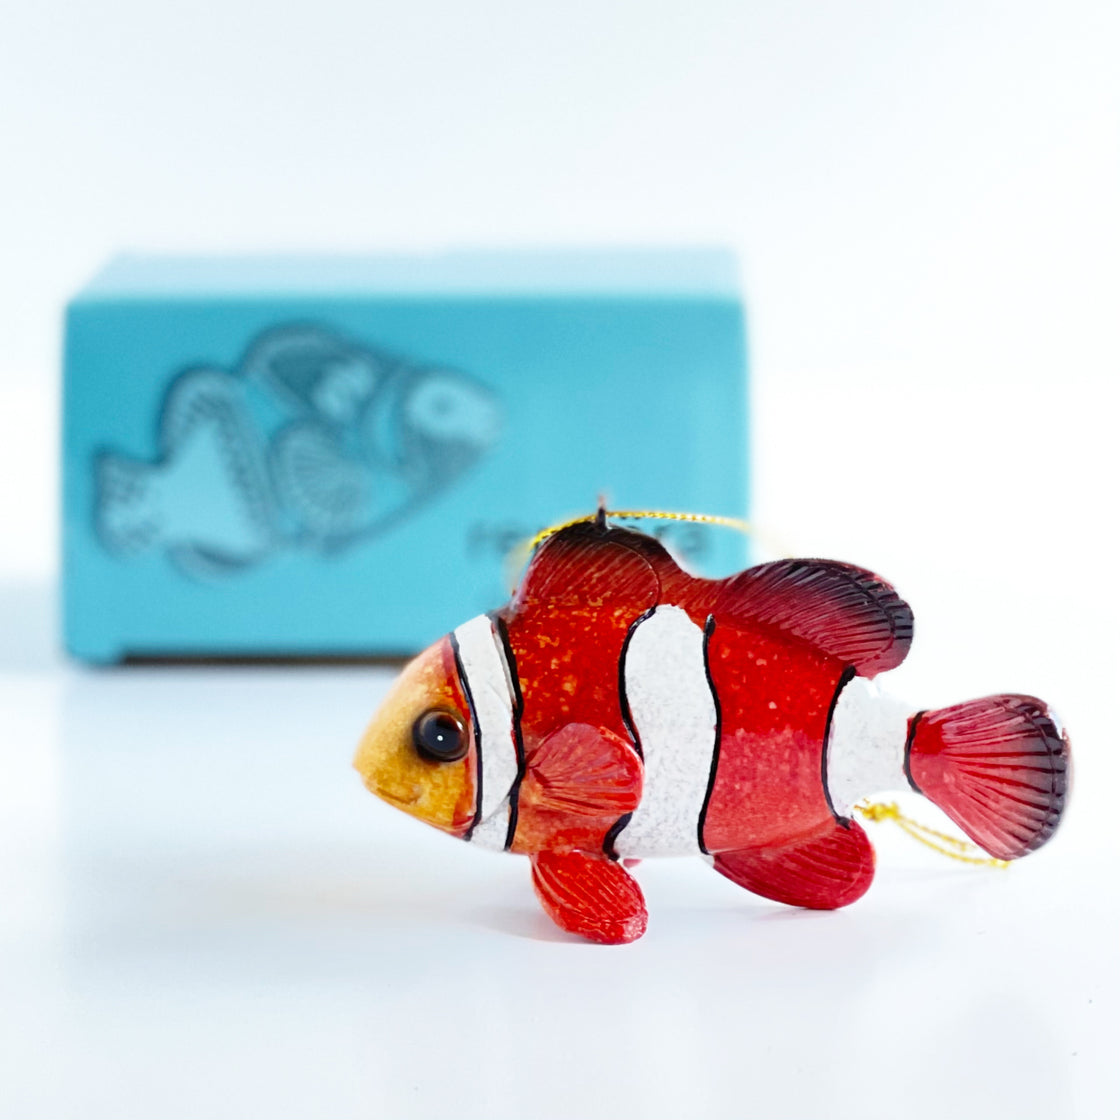 rengöra tropical fish ornament showcases vibrant colors and intricate details against softly blurred background